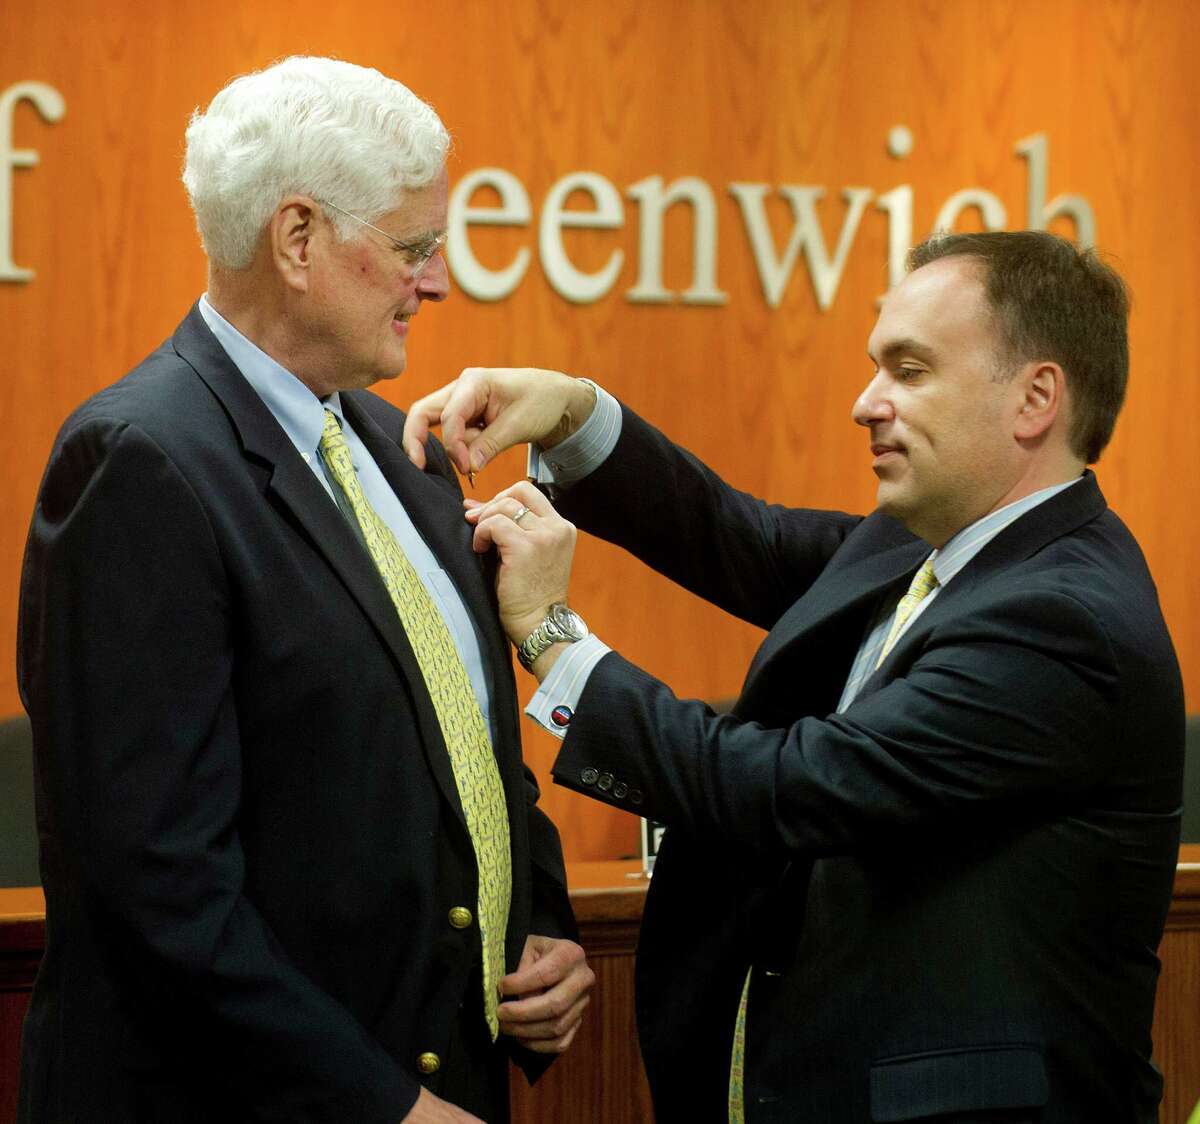 John Toner gets a town of Greenwich pin from First Selectman Peter Tesei before Toner is sworn-in as Selectman during a special meeting at Greenwich Town Hall in Greenwich, Conn., on Wednesday, January 14, 2015, to fill the position left by the death of Dave Theis.